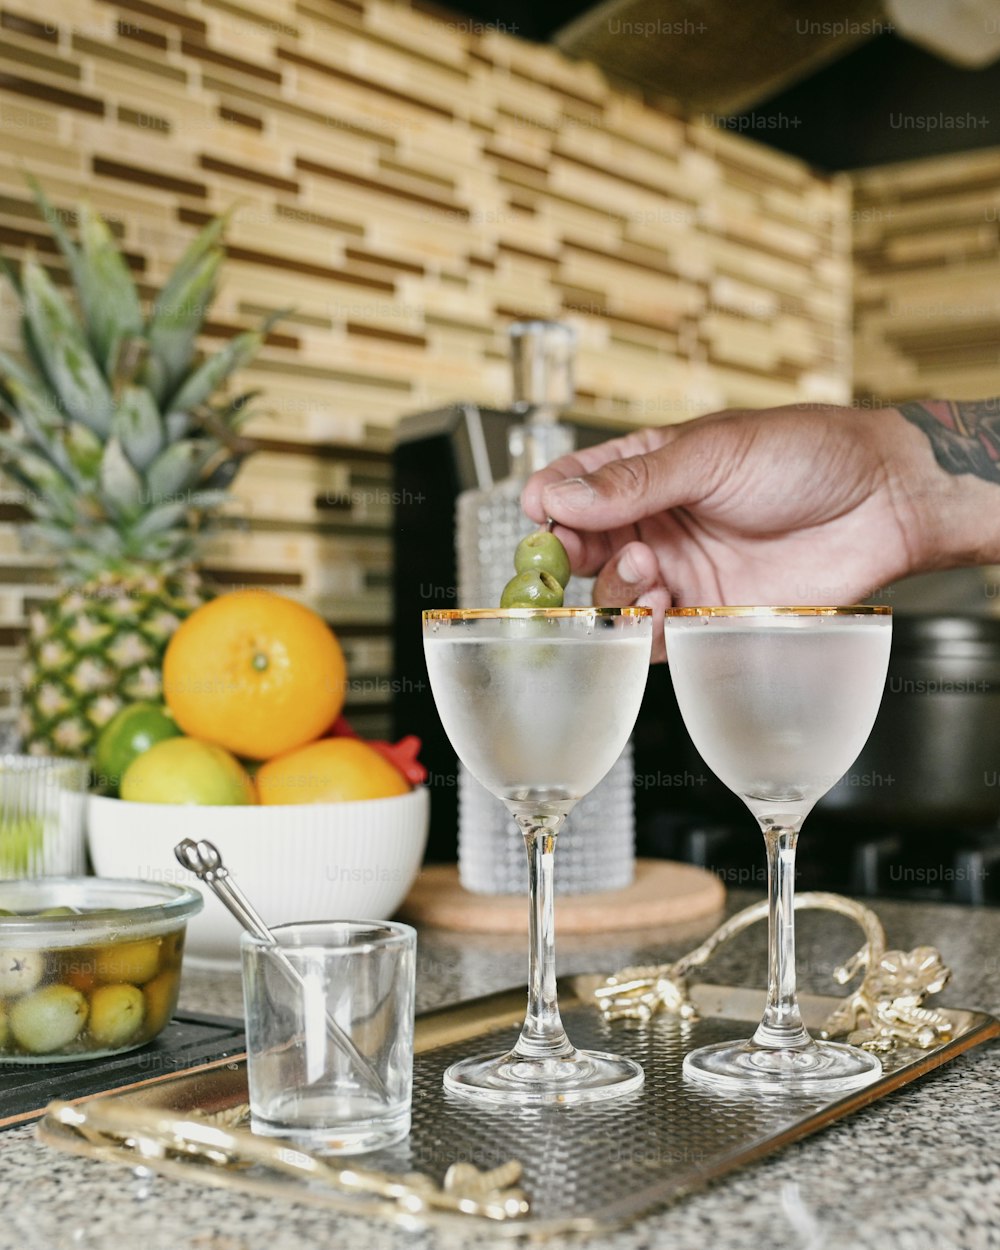 a person is putting a piece of fruit in a martini glass